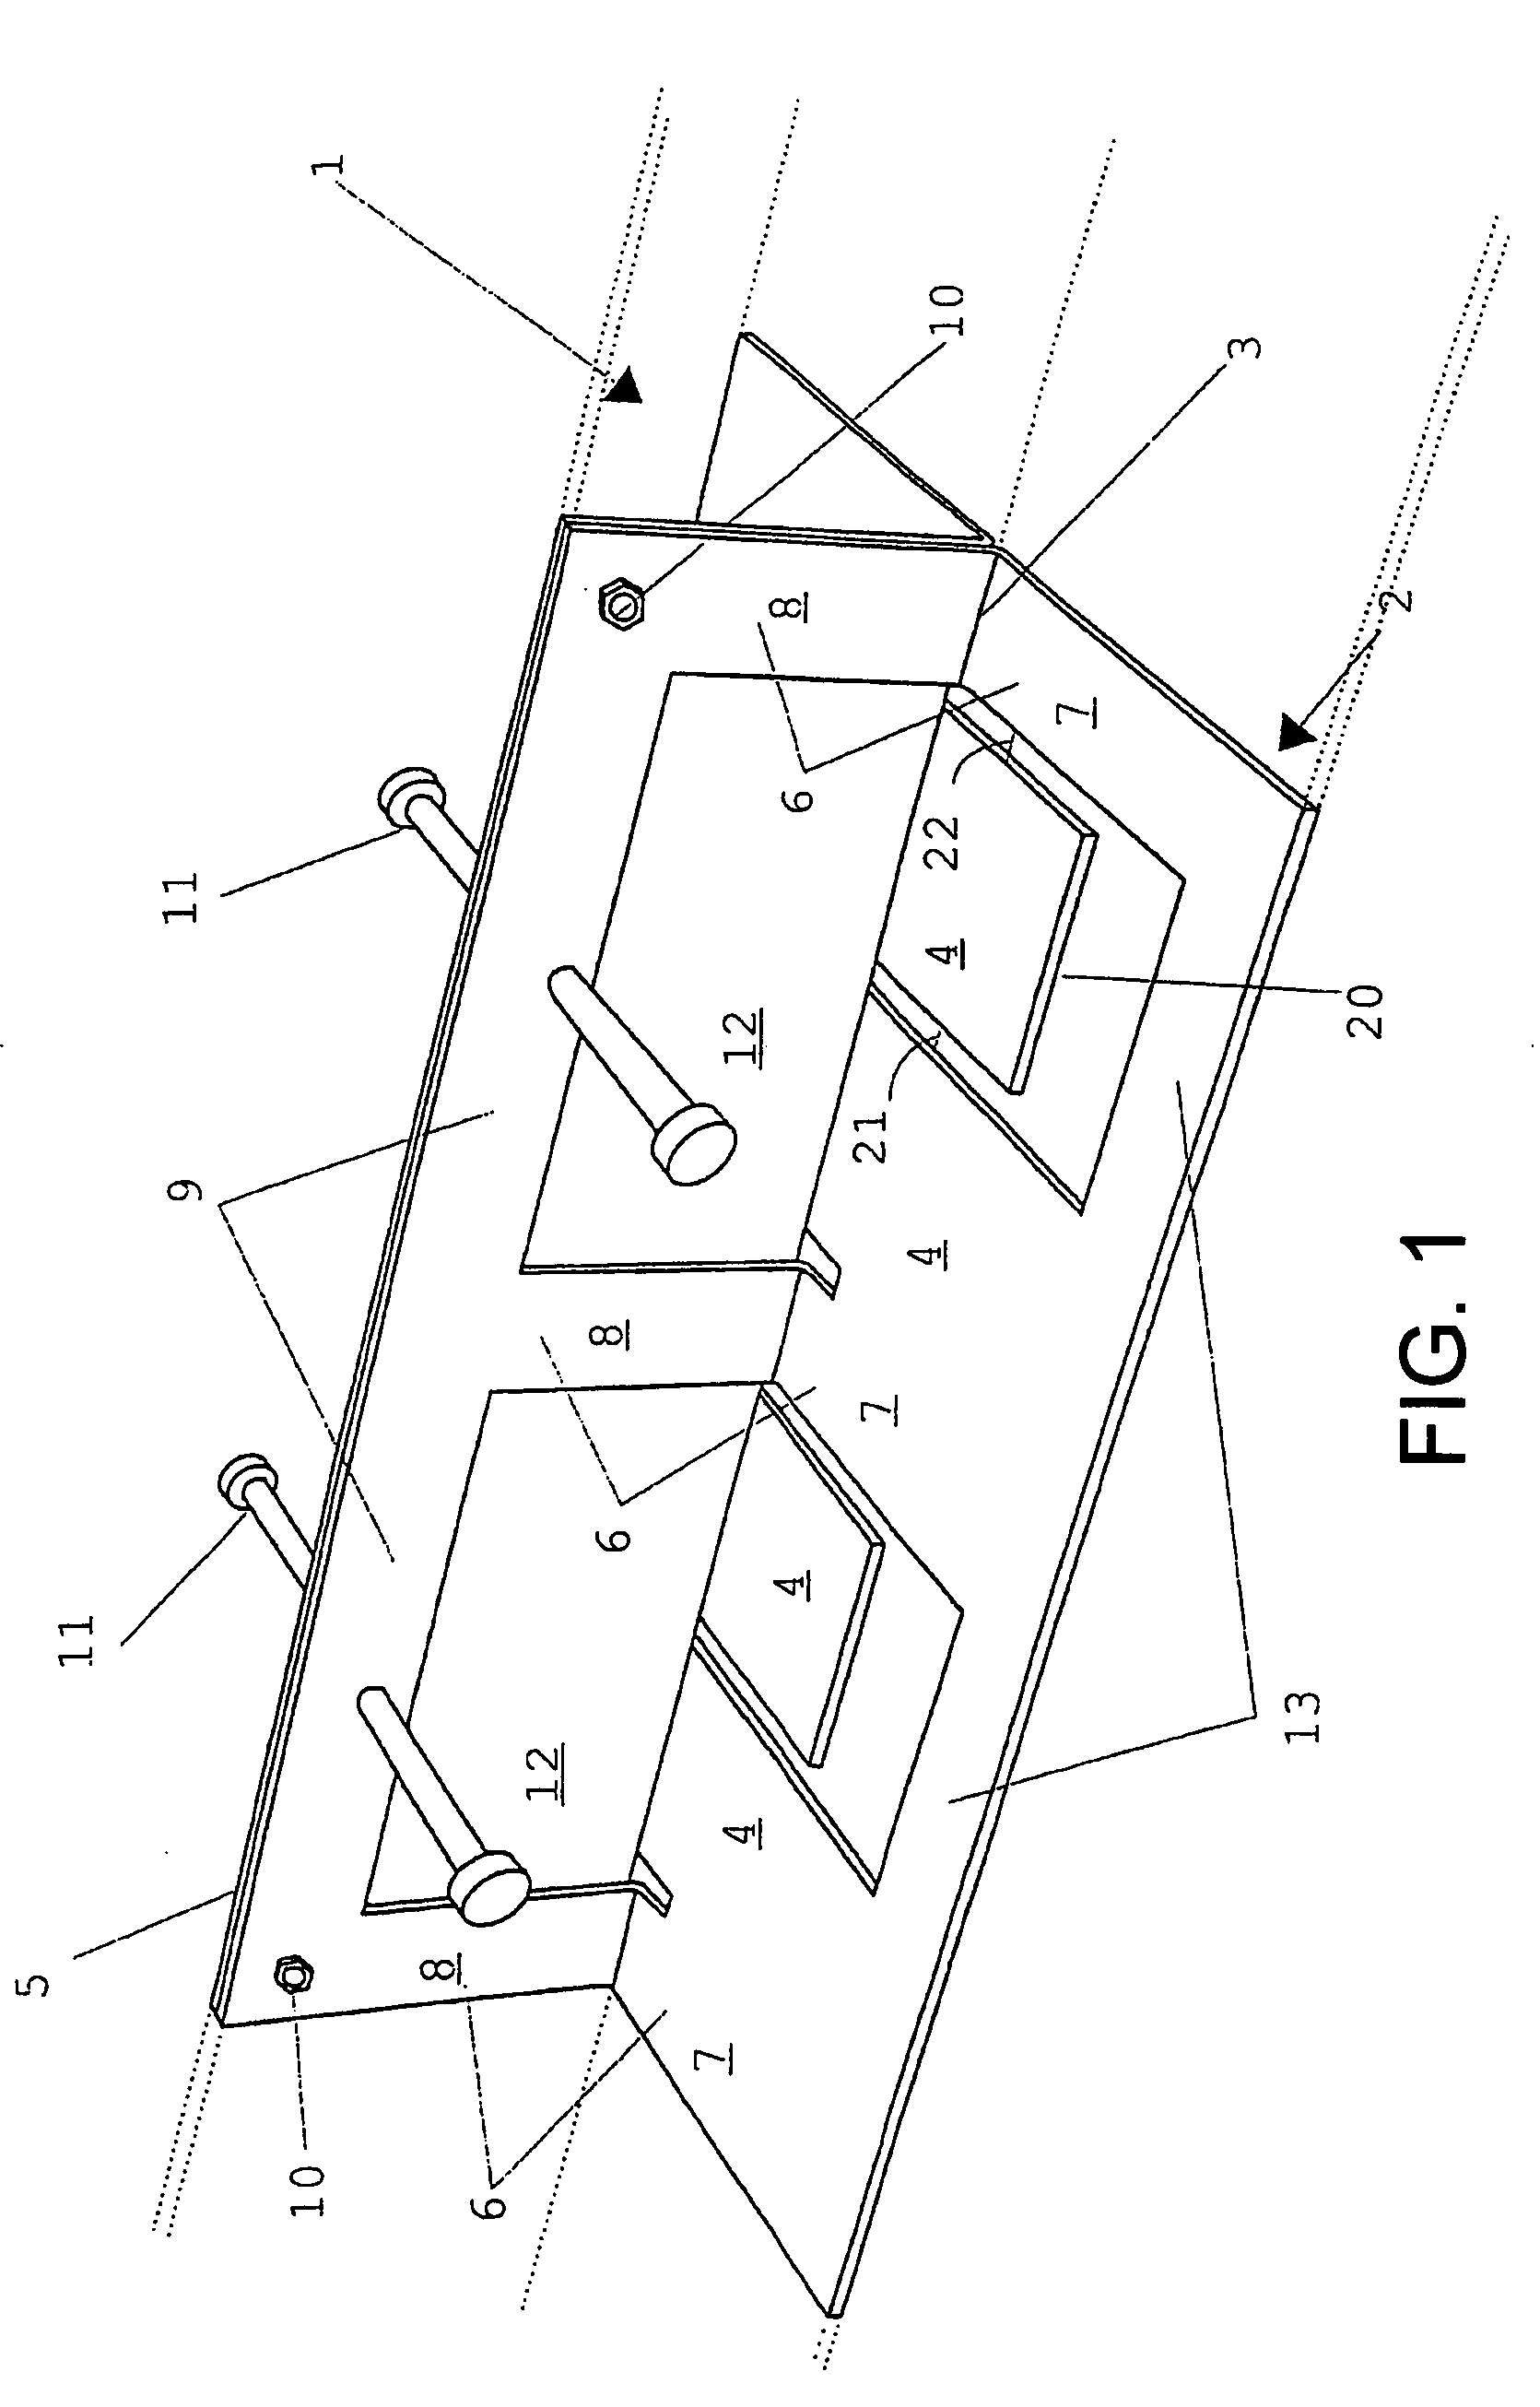 Device for equipping an expansion joint, in particular an expansion joint between concrete slabs